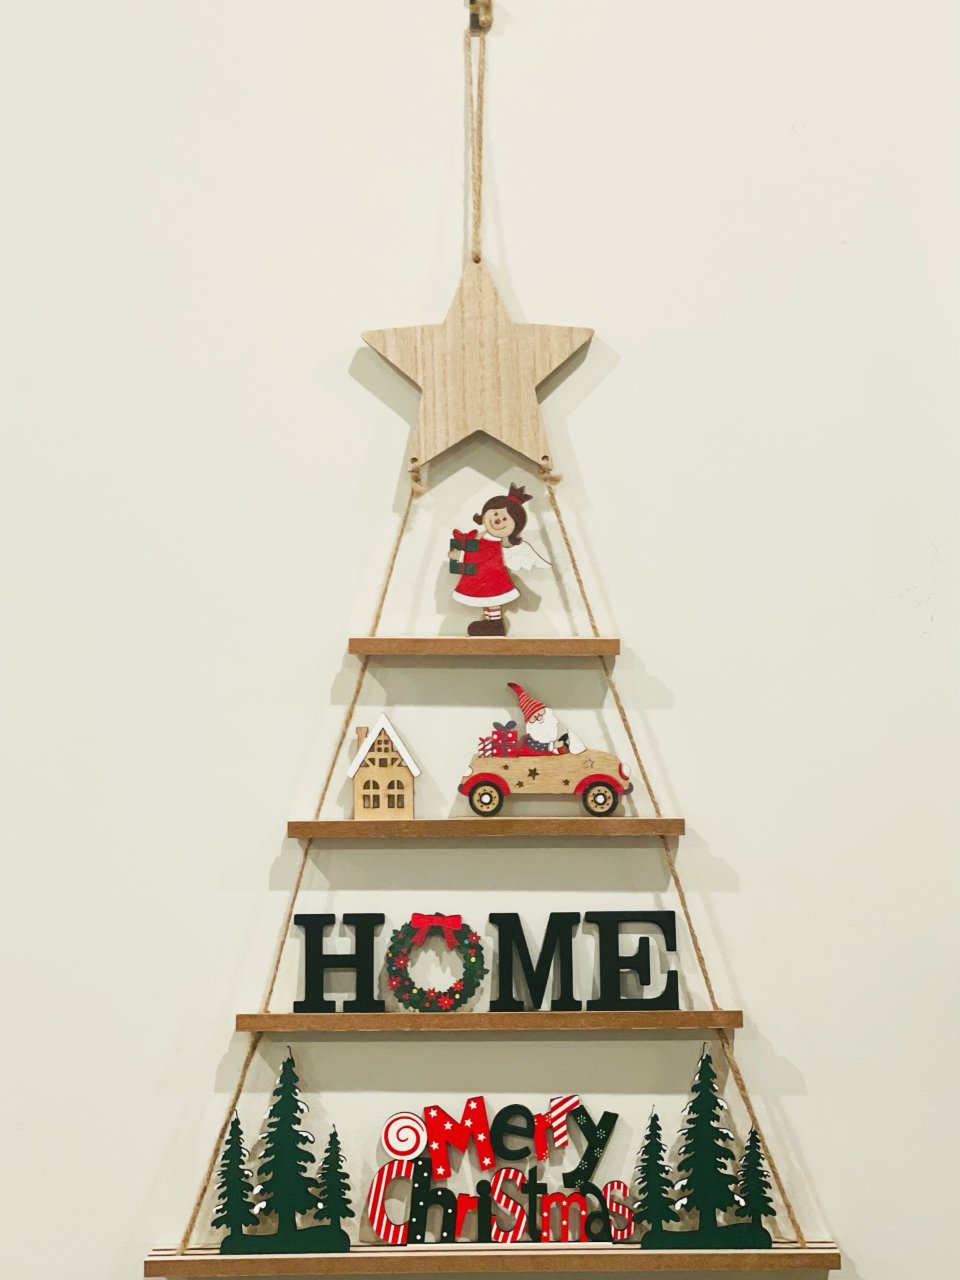 Christmas Wall Decor, IDATOO Wooden Hanging Christmas Decorations with 4 Tiers, Tiered Xmas Tree Ornament with Welcome Home Sign for Personalized Decor Christmas Xmas Tree Window Door Outdoor Indoor : Home & Kitchen